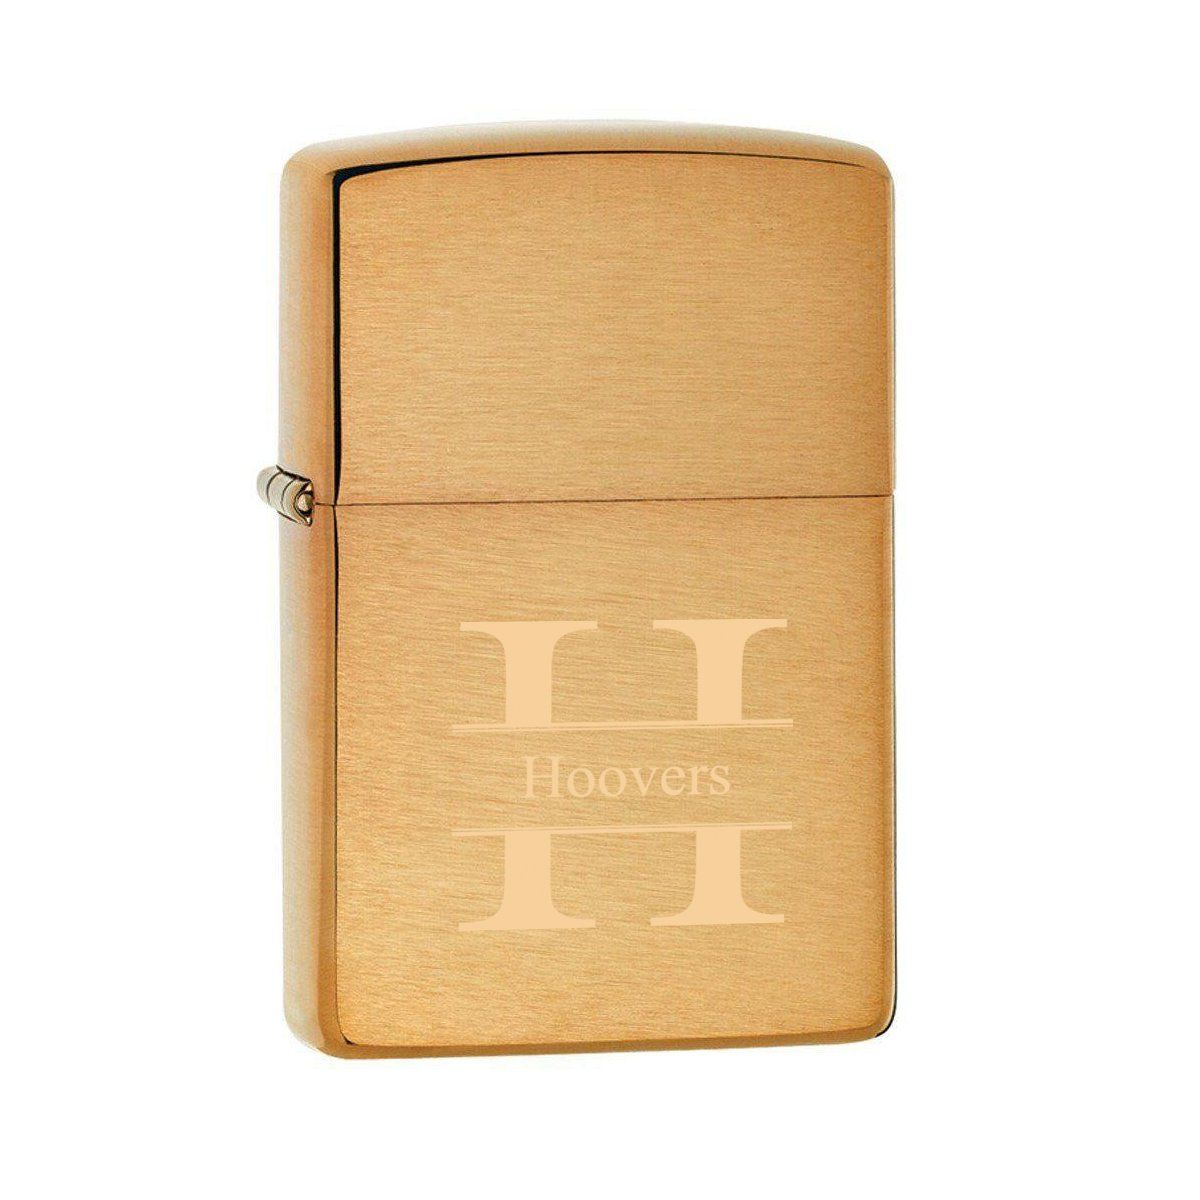 Personalized Brushed Brass Zippo Lighter